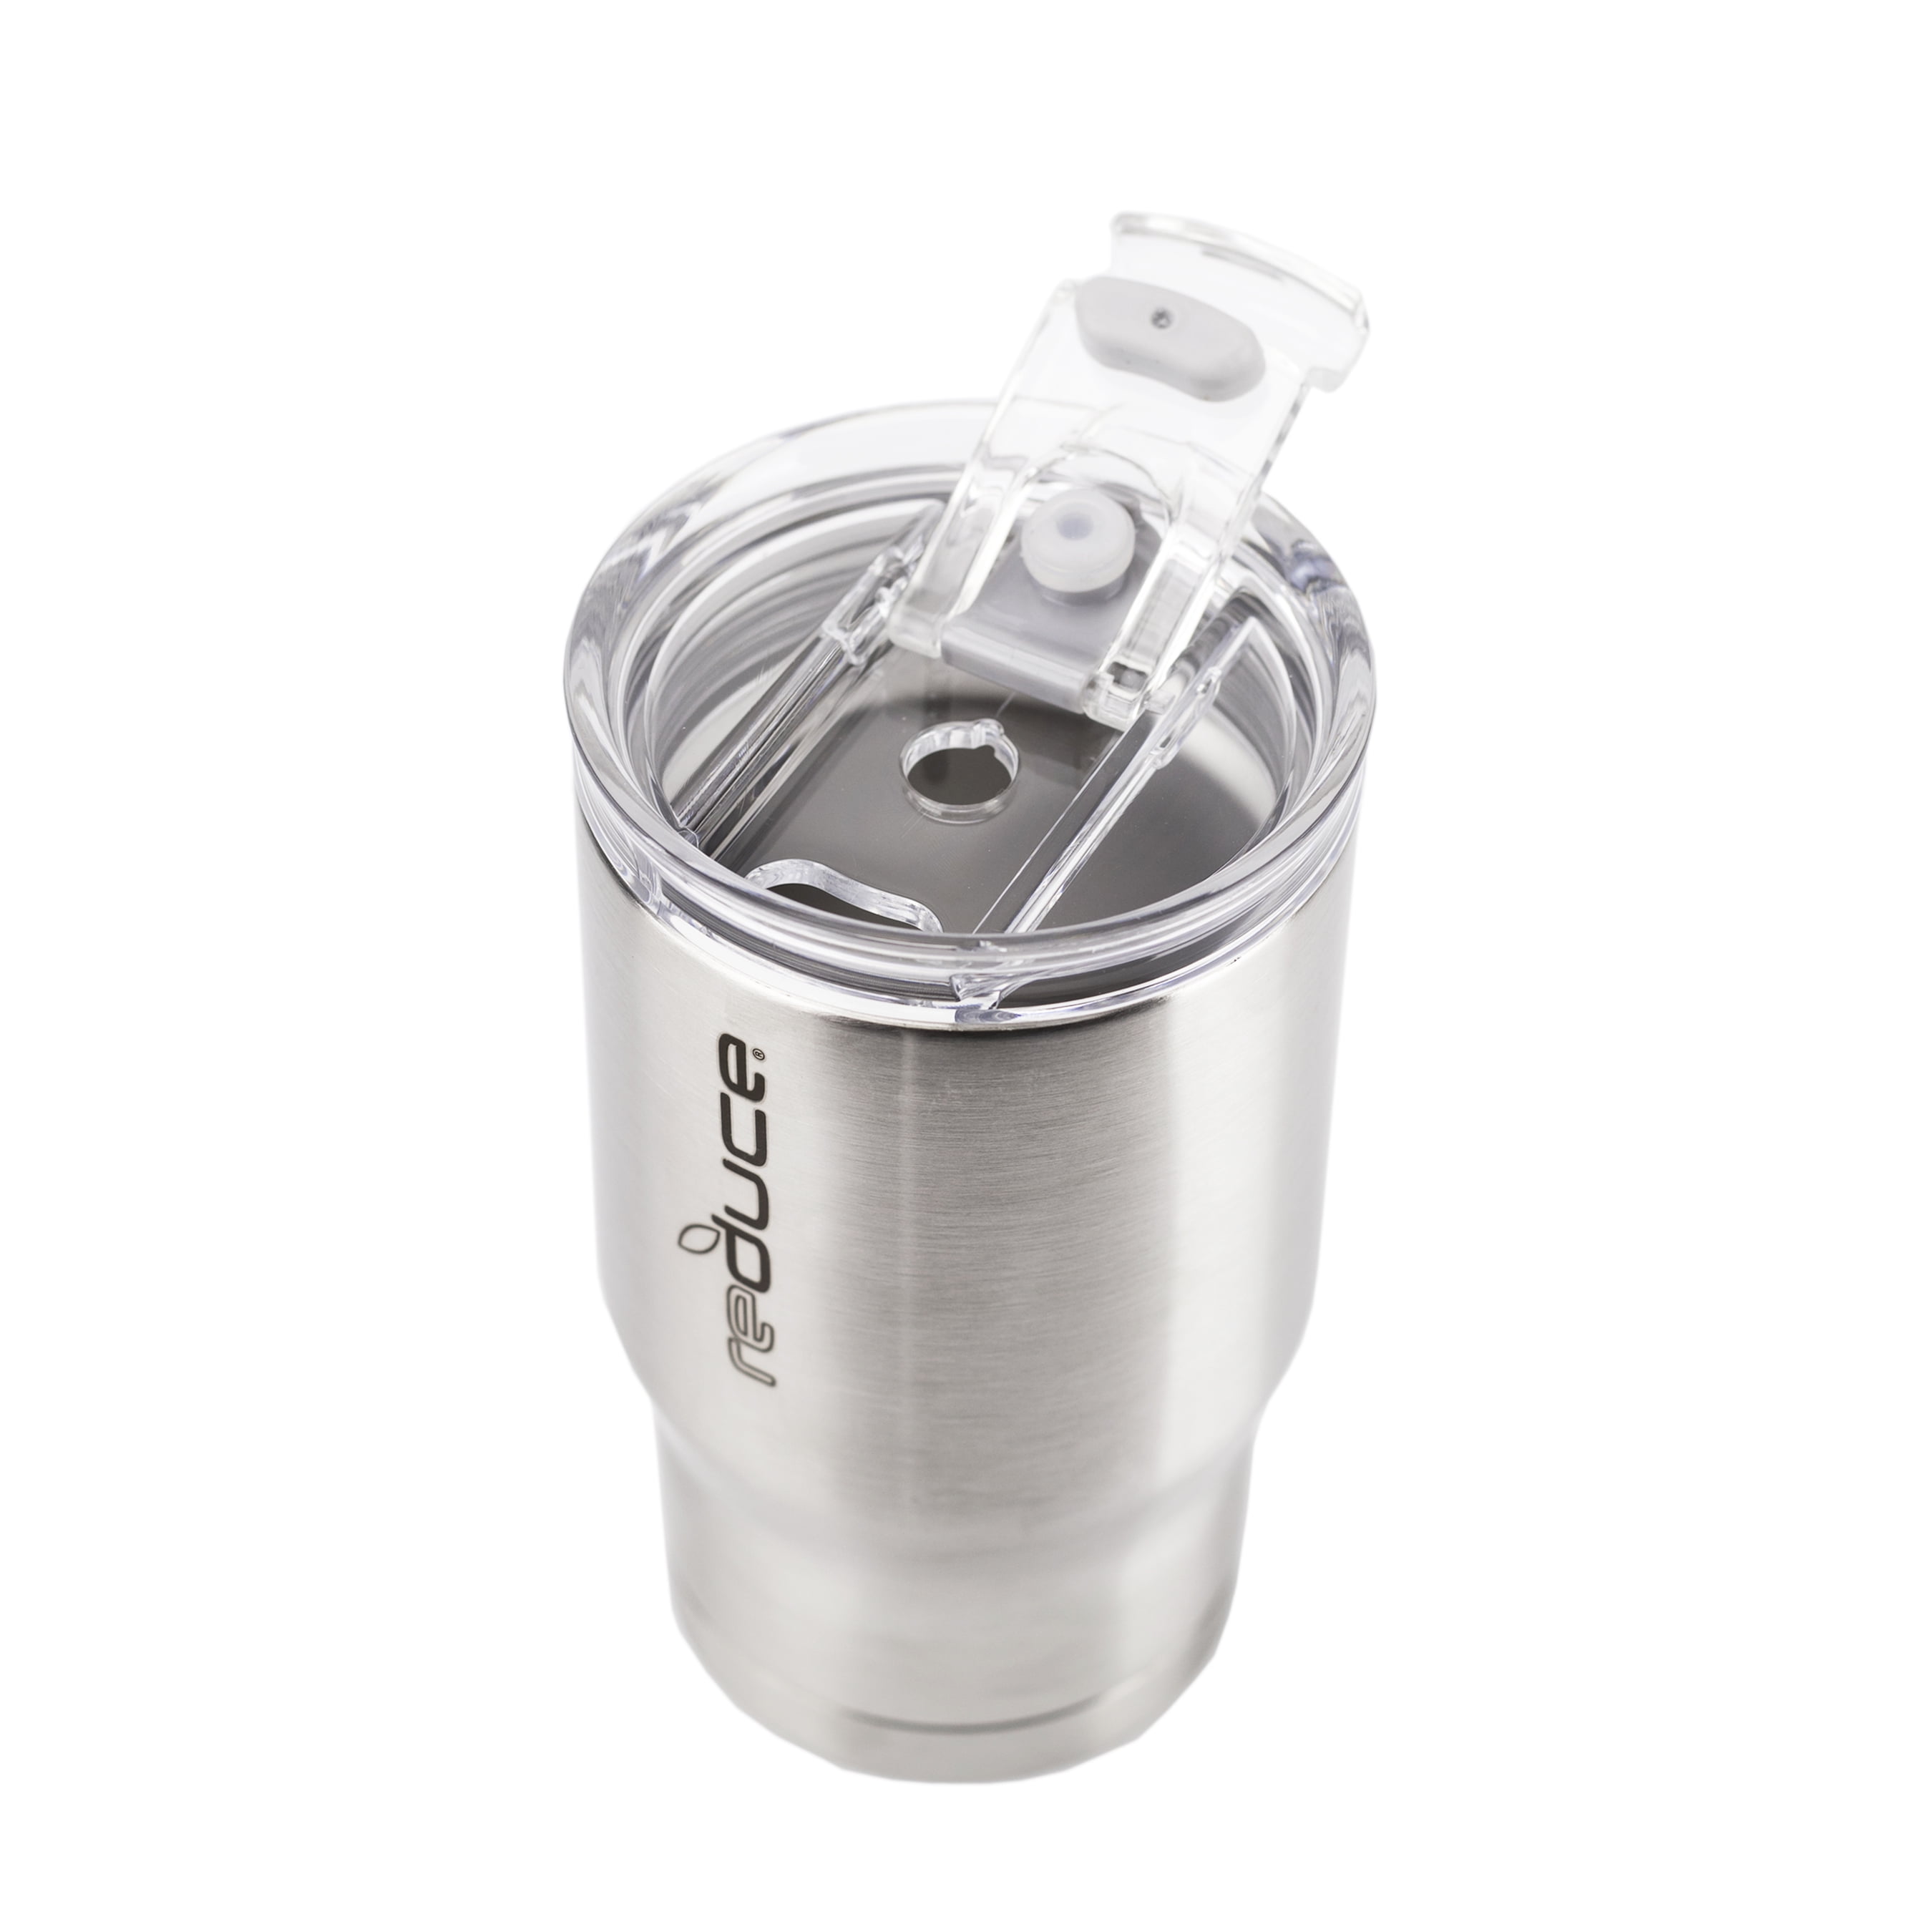  Reduce Stainless Steel Tumblers from $7.99 - Kids Activities, Saving Money, Home Management